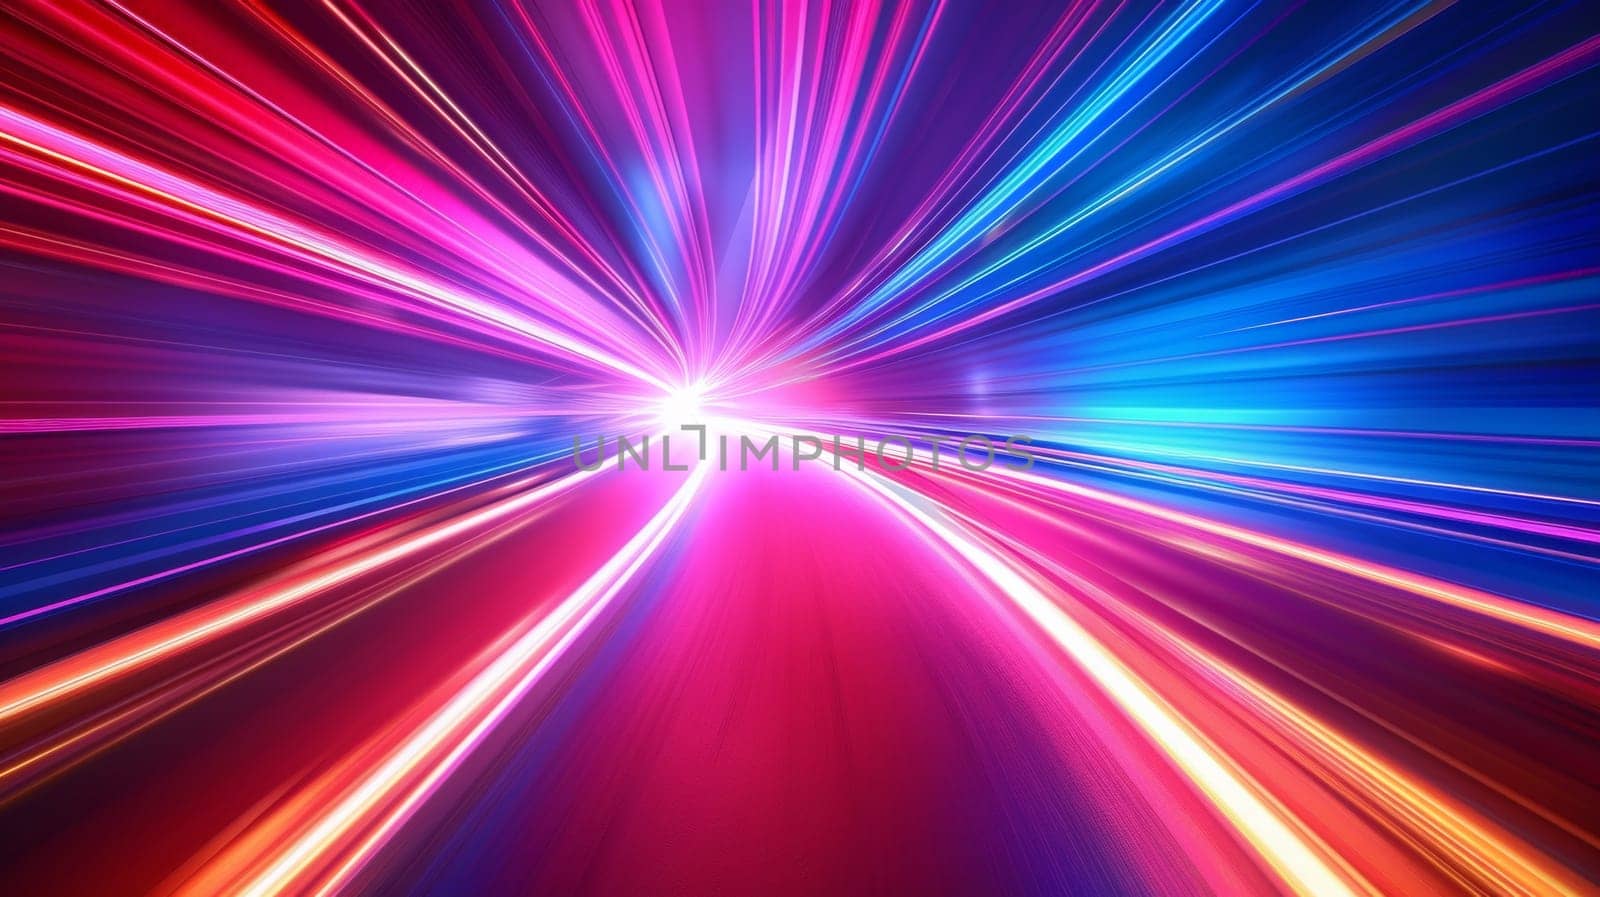 A colorful abstract background with a bright light trail, AI by starush